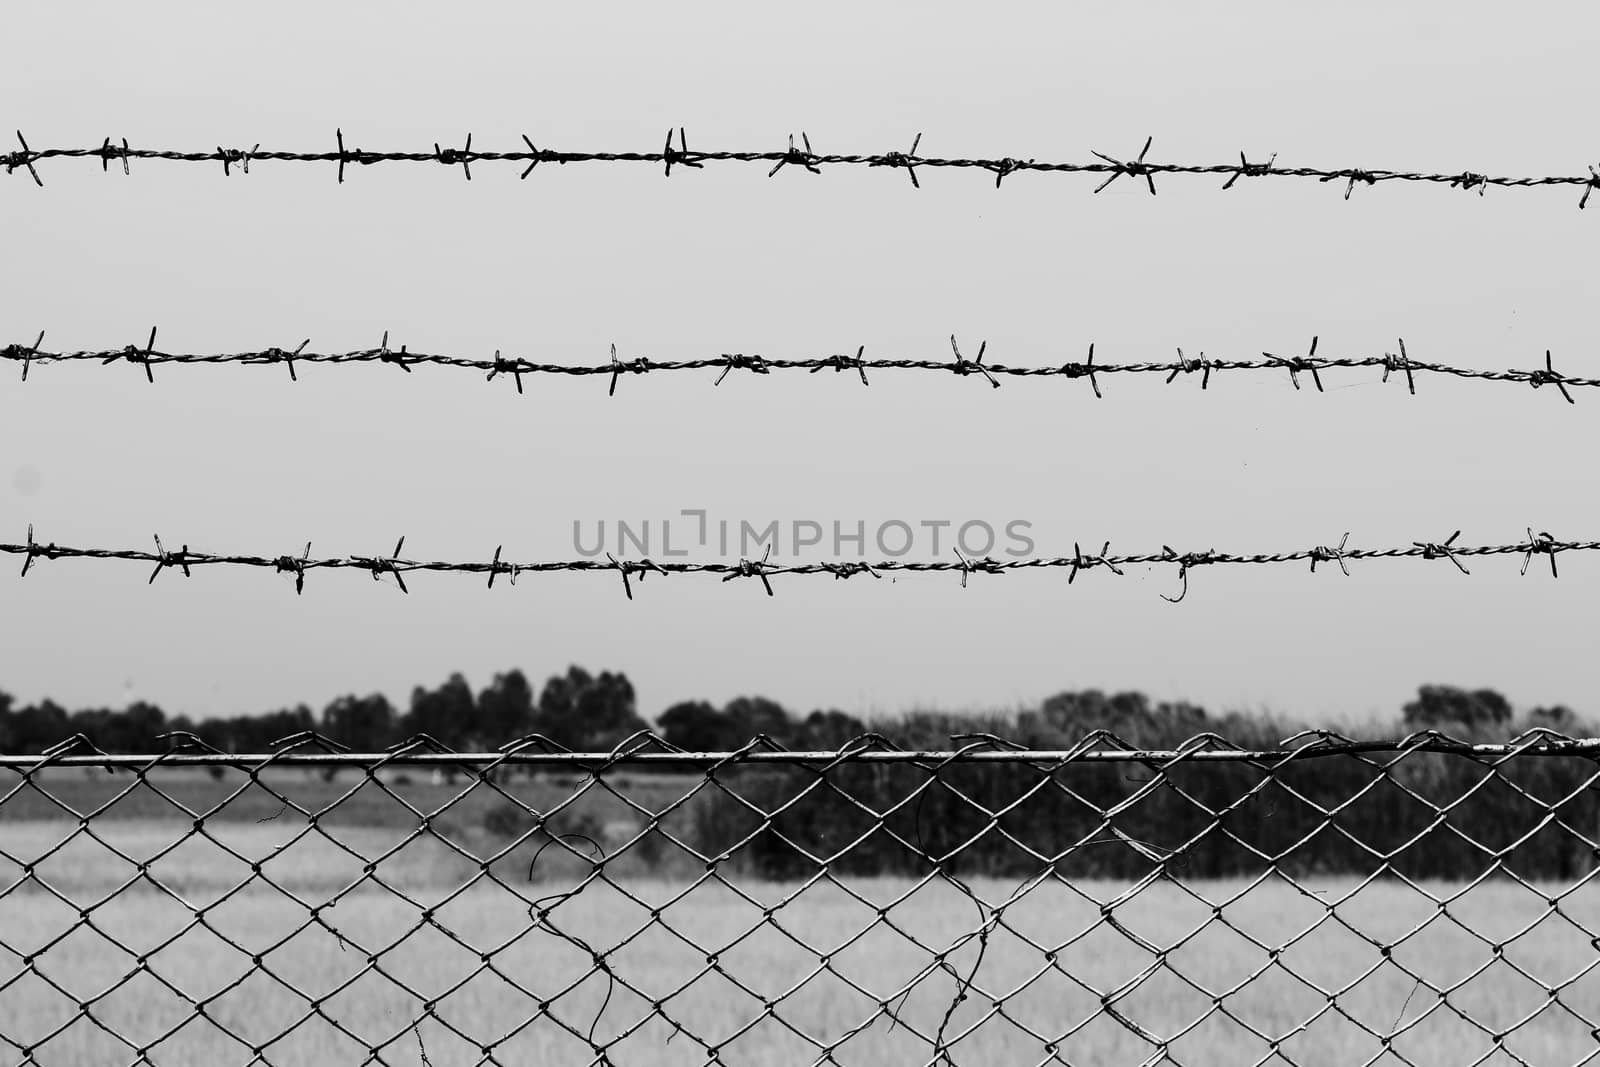 Barbed wire detention center at countryside and background gray color style